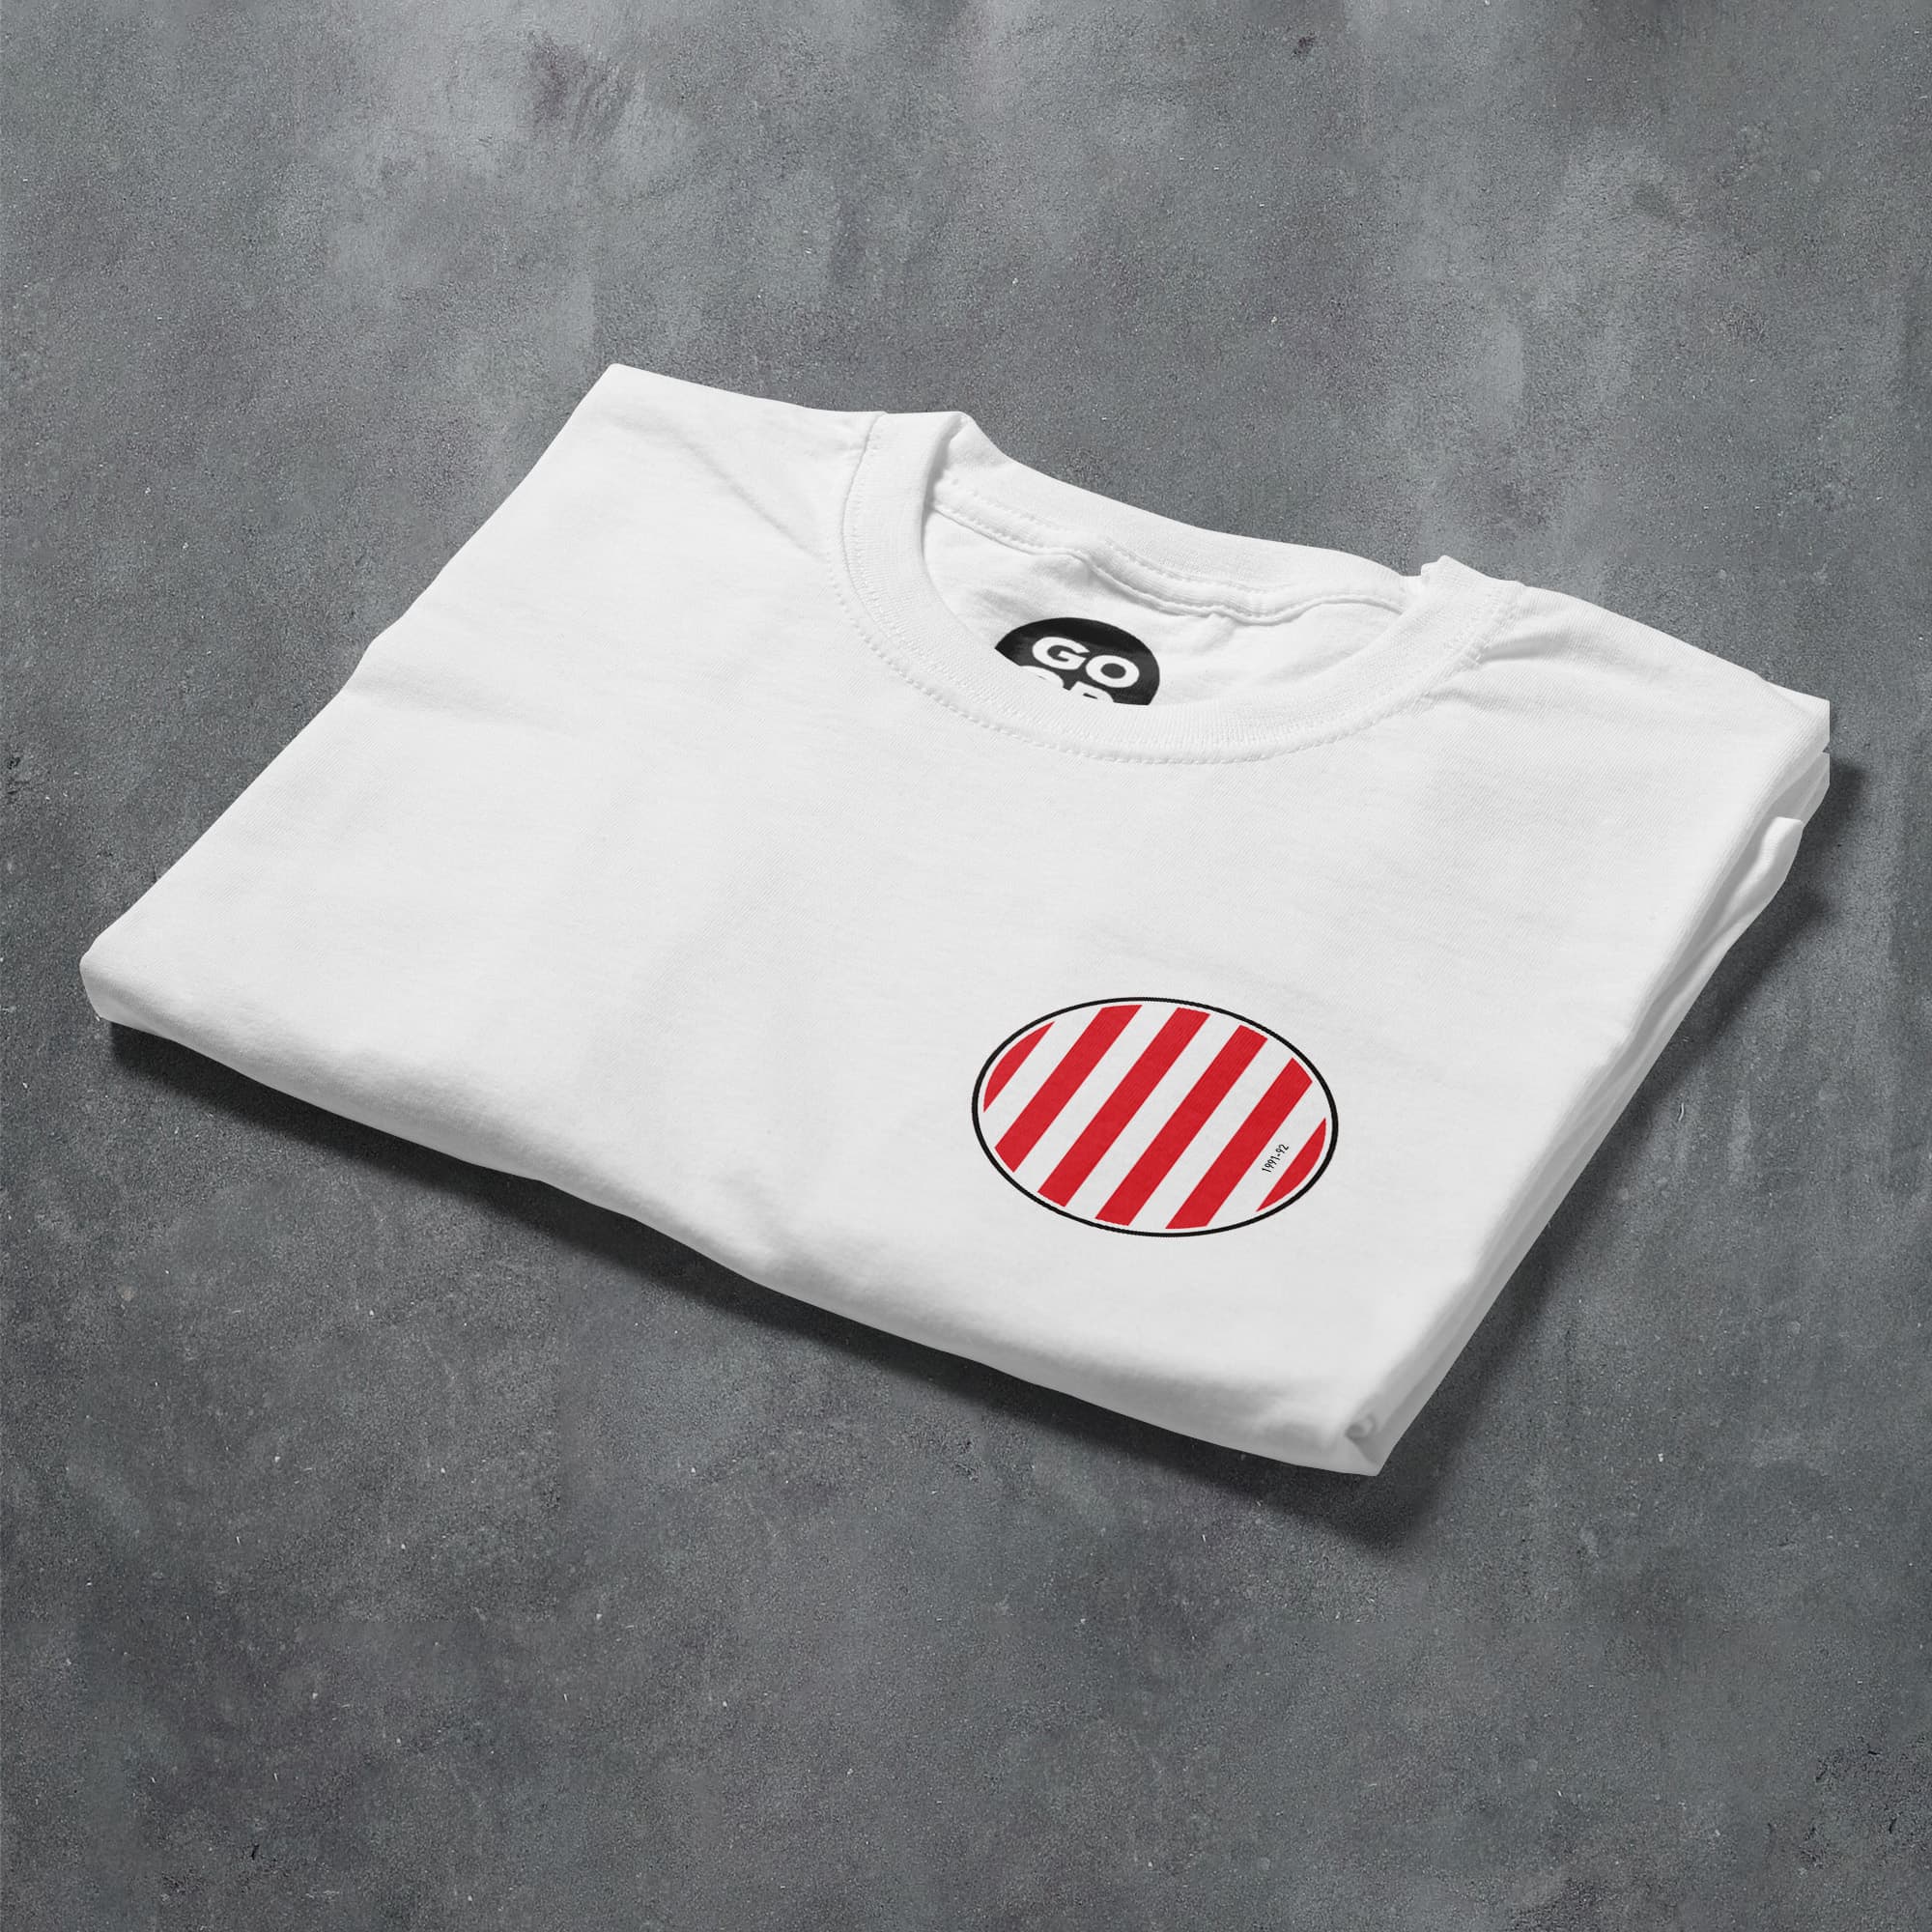 a white t - shirt with red and white stripes on it